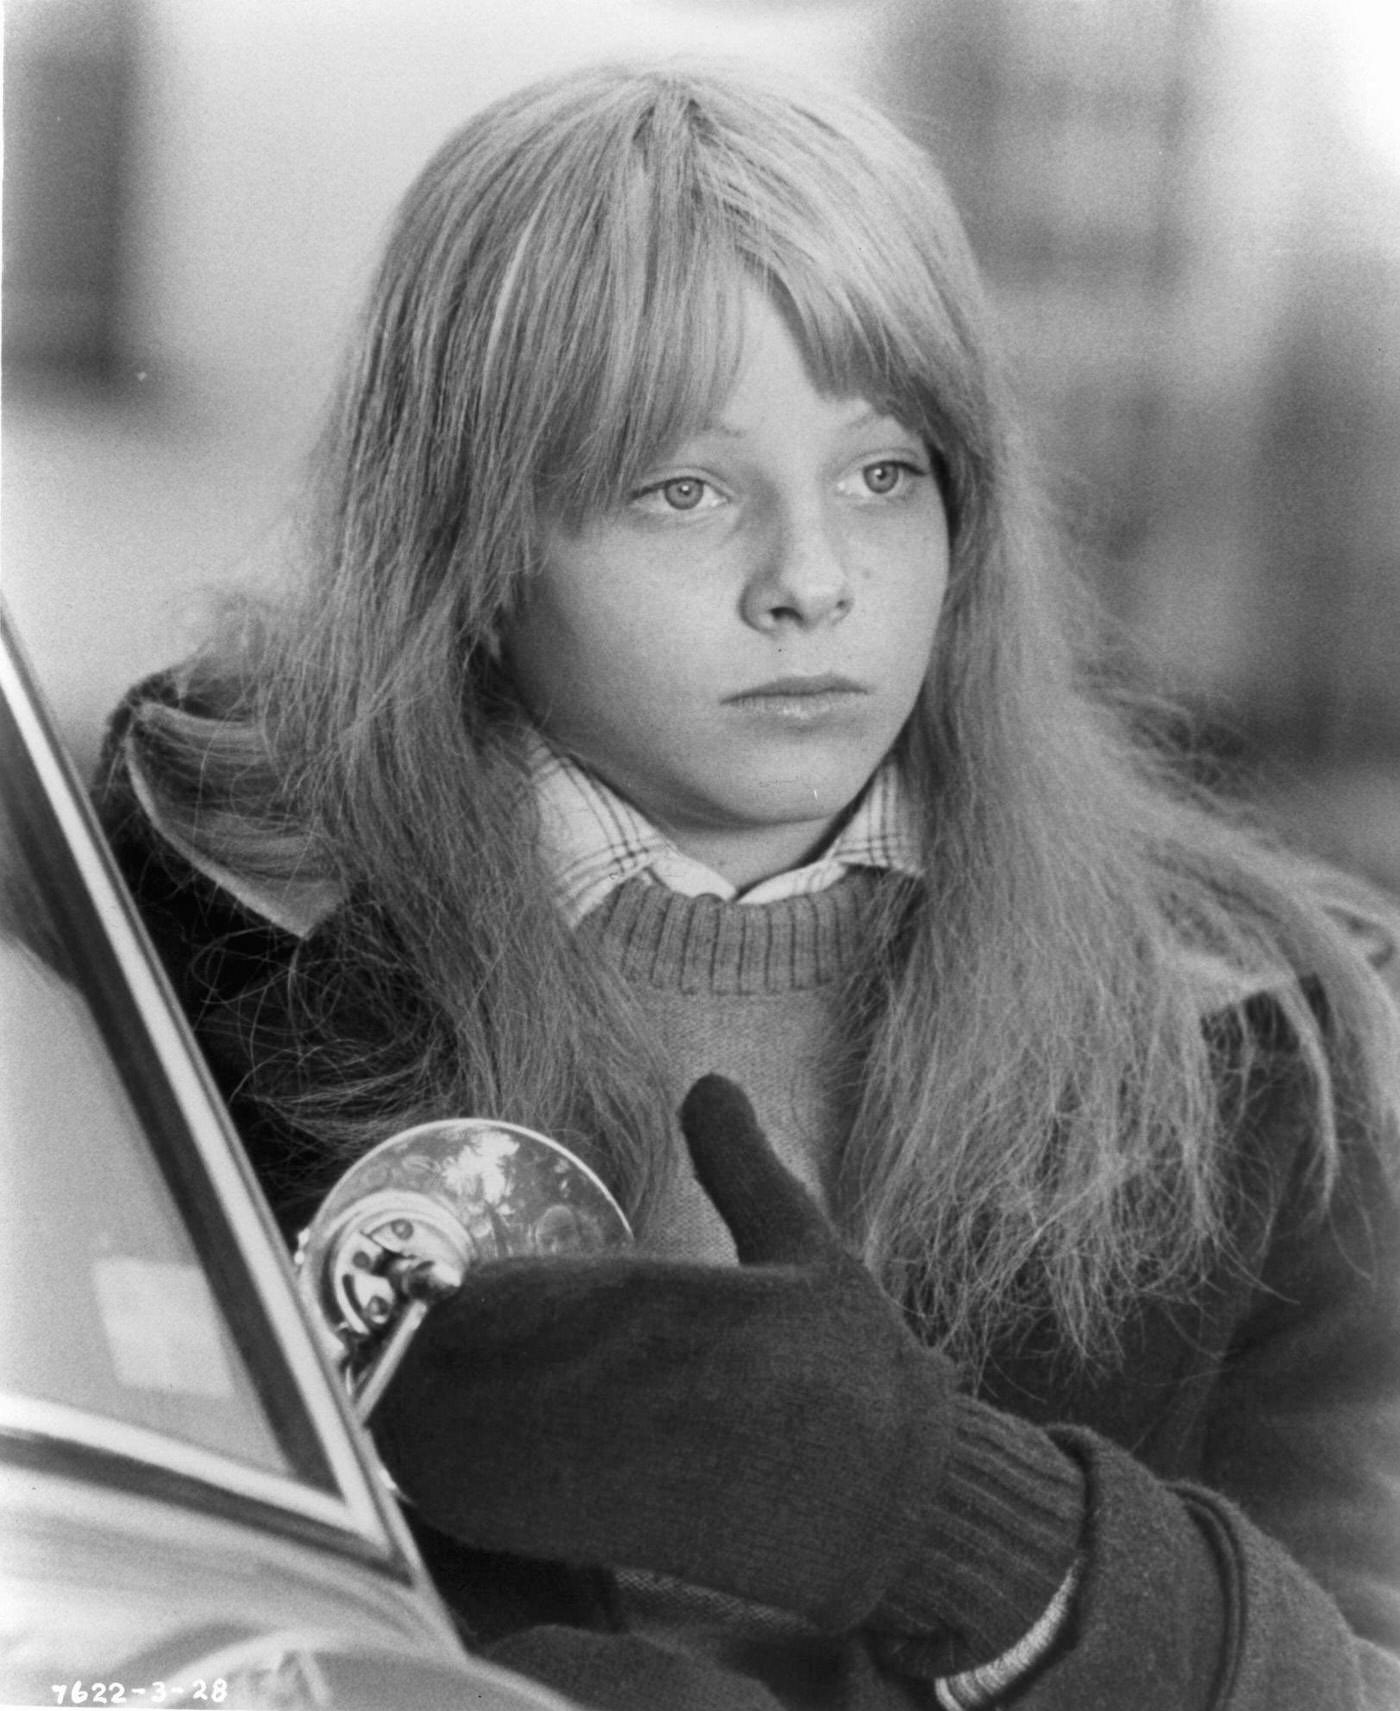 Jodie Foster standing beside a car in 'The Little Girl Who Lives Down The Lane', 1976.